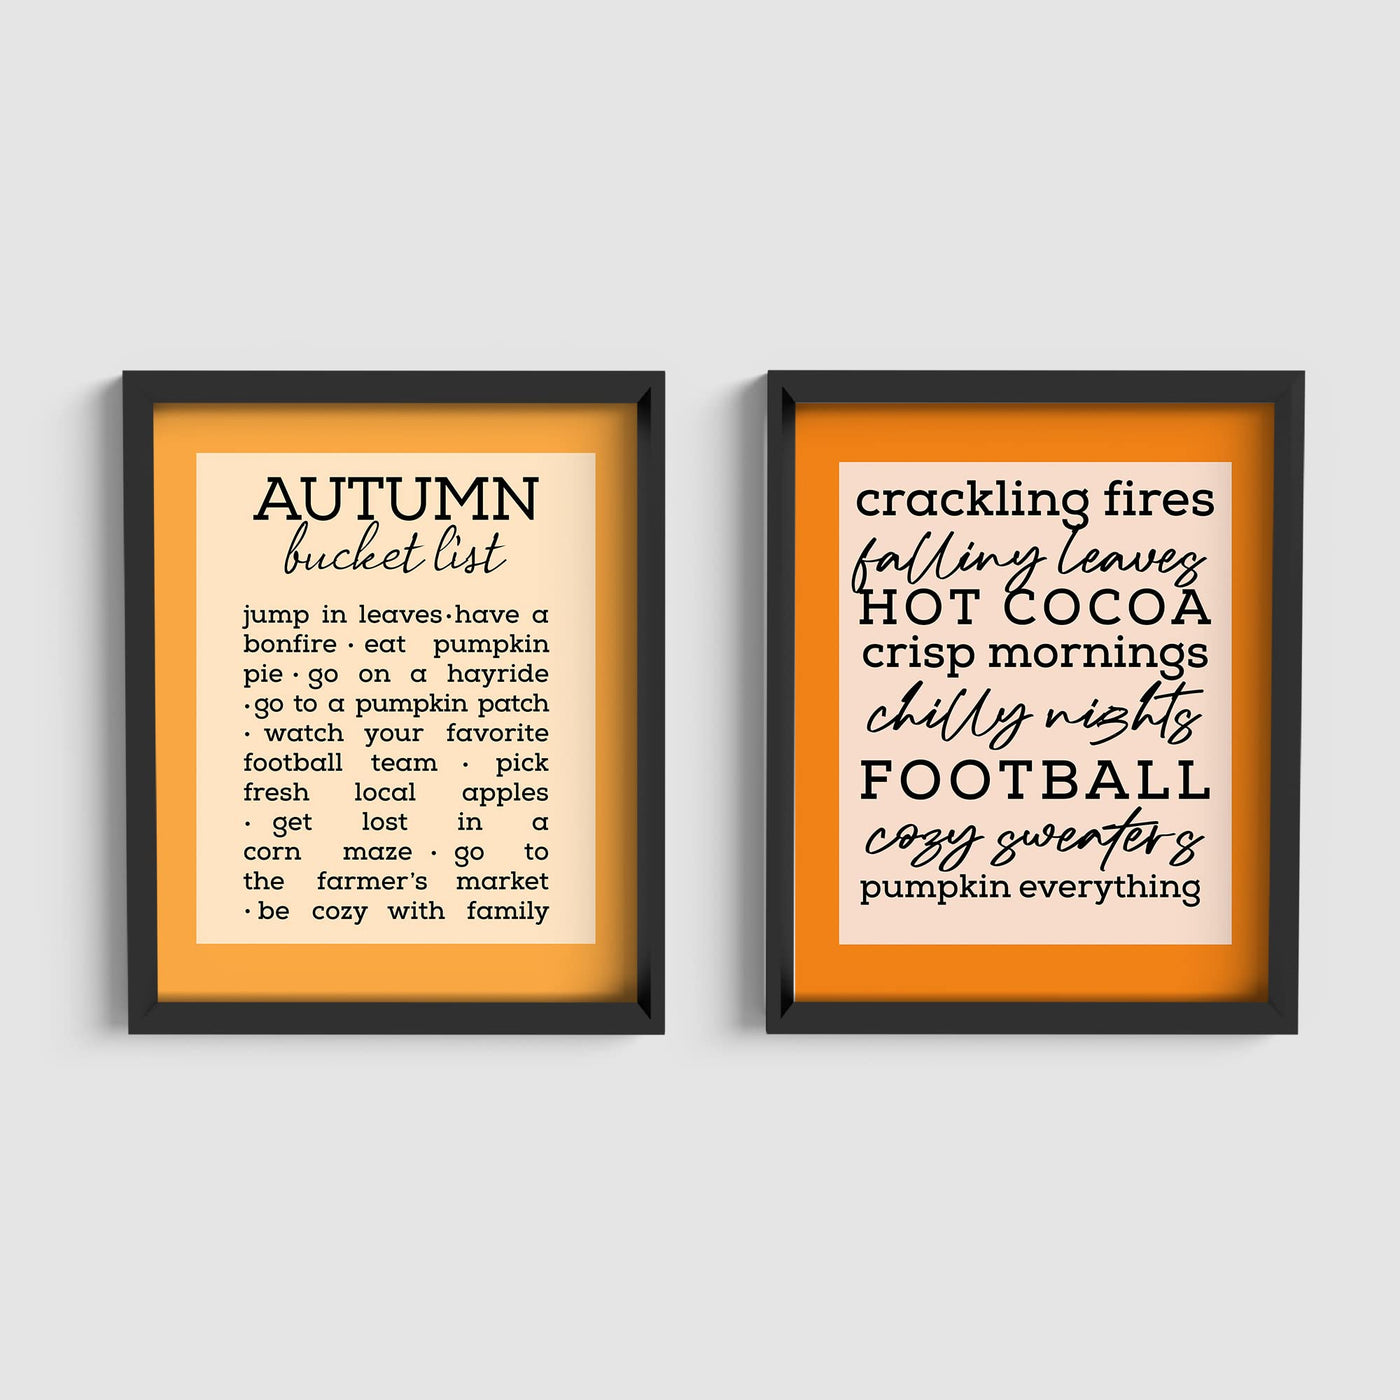 Autumn Bucket List &"Crackling Fires" 2-Piece Wall Art Set- 8 x 10"s Fall Decor Wall Prints-Ready to Frame. Home-Kitchen-Living-Family-Holiday Wall Decor. Great Gift & Reminders of Fall Fun!